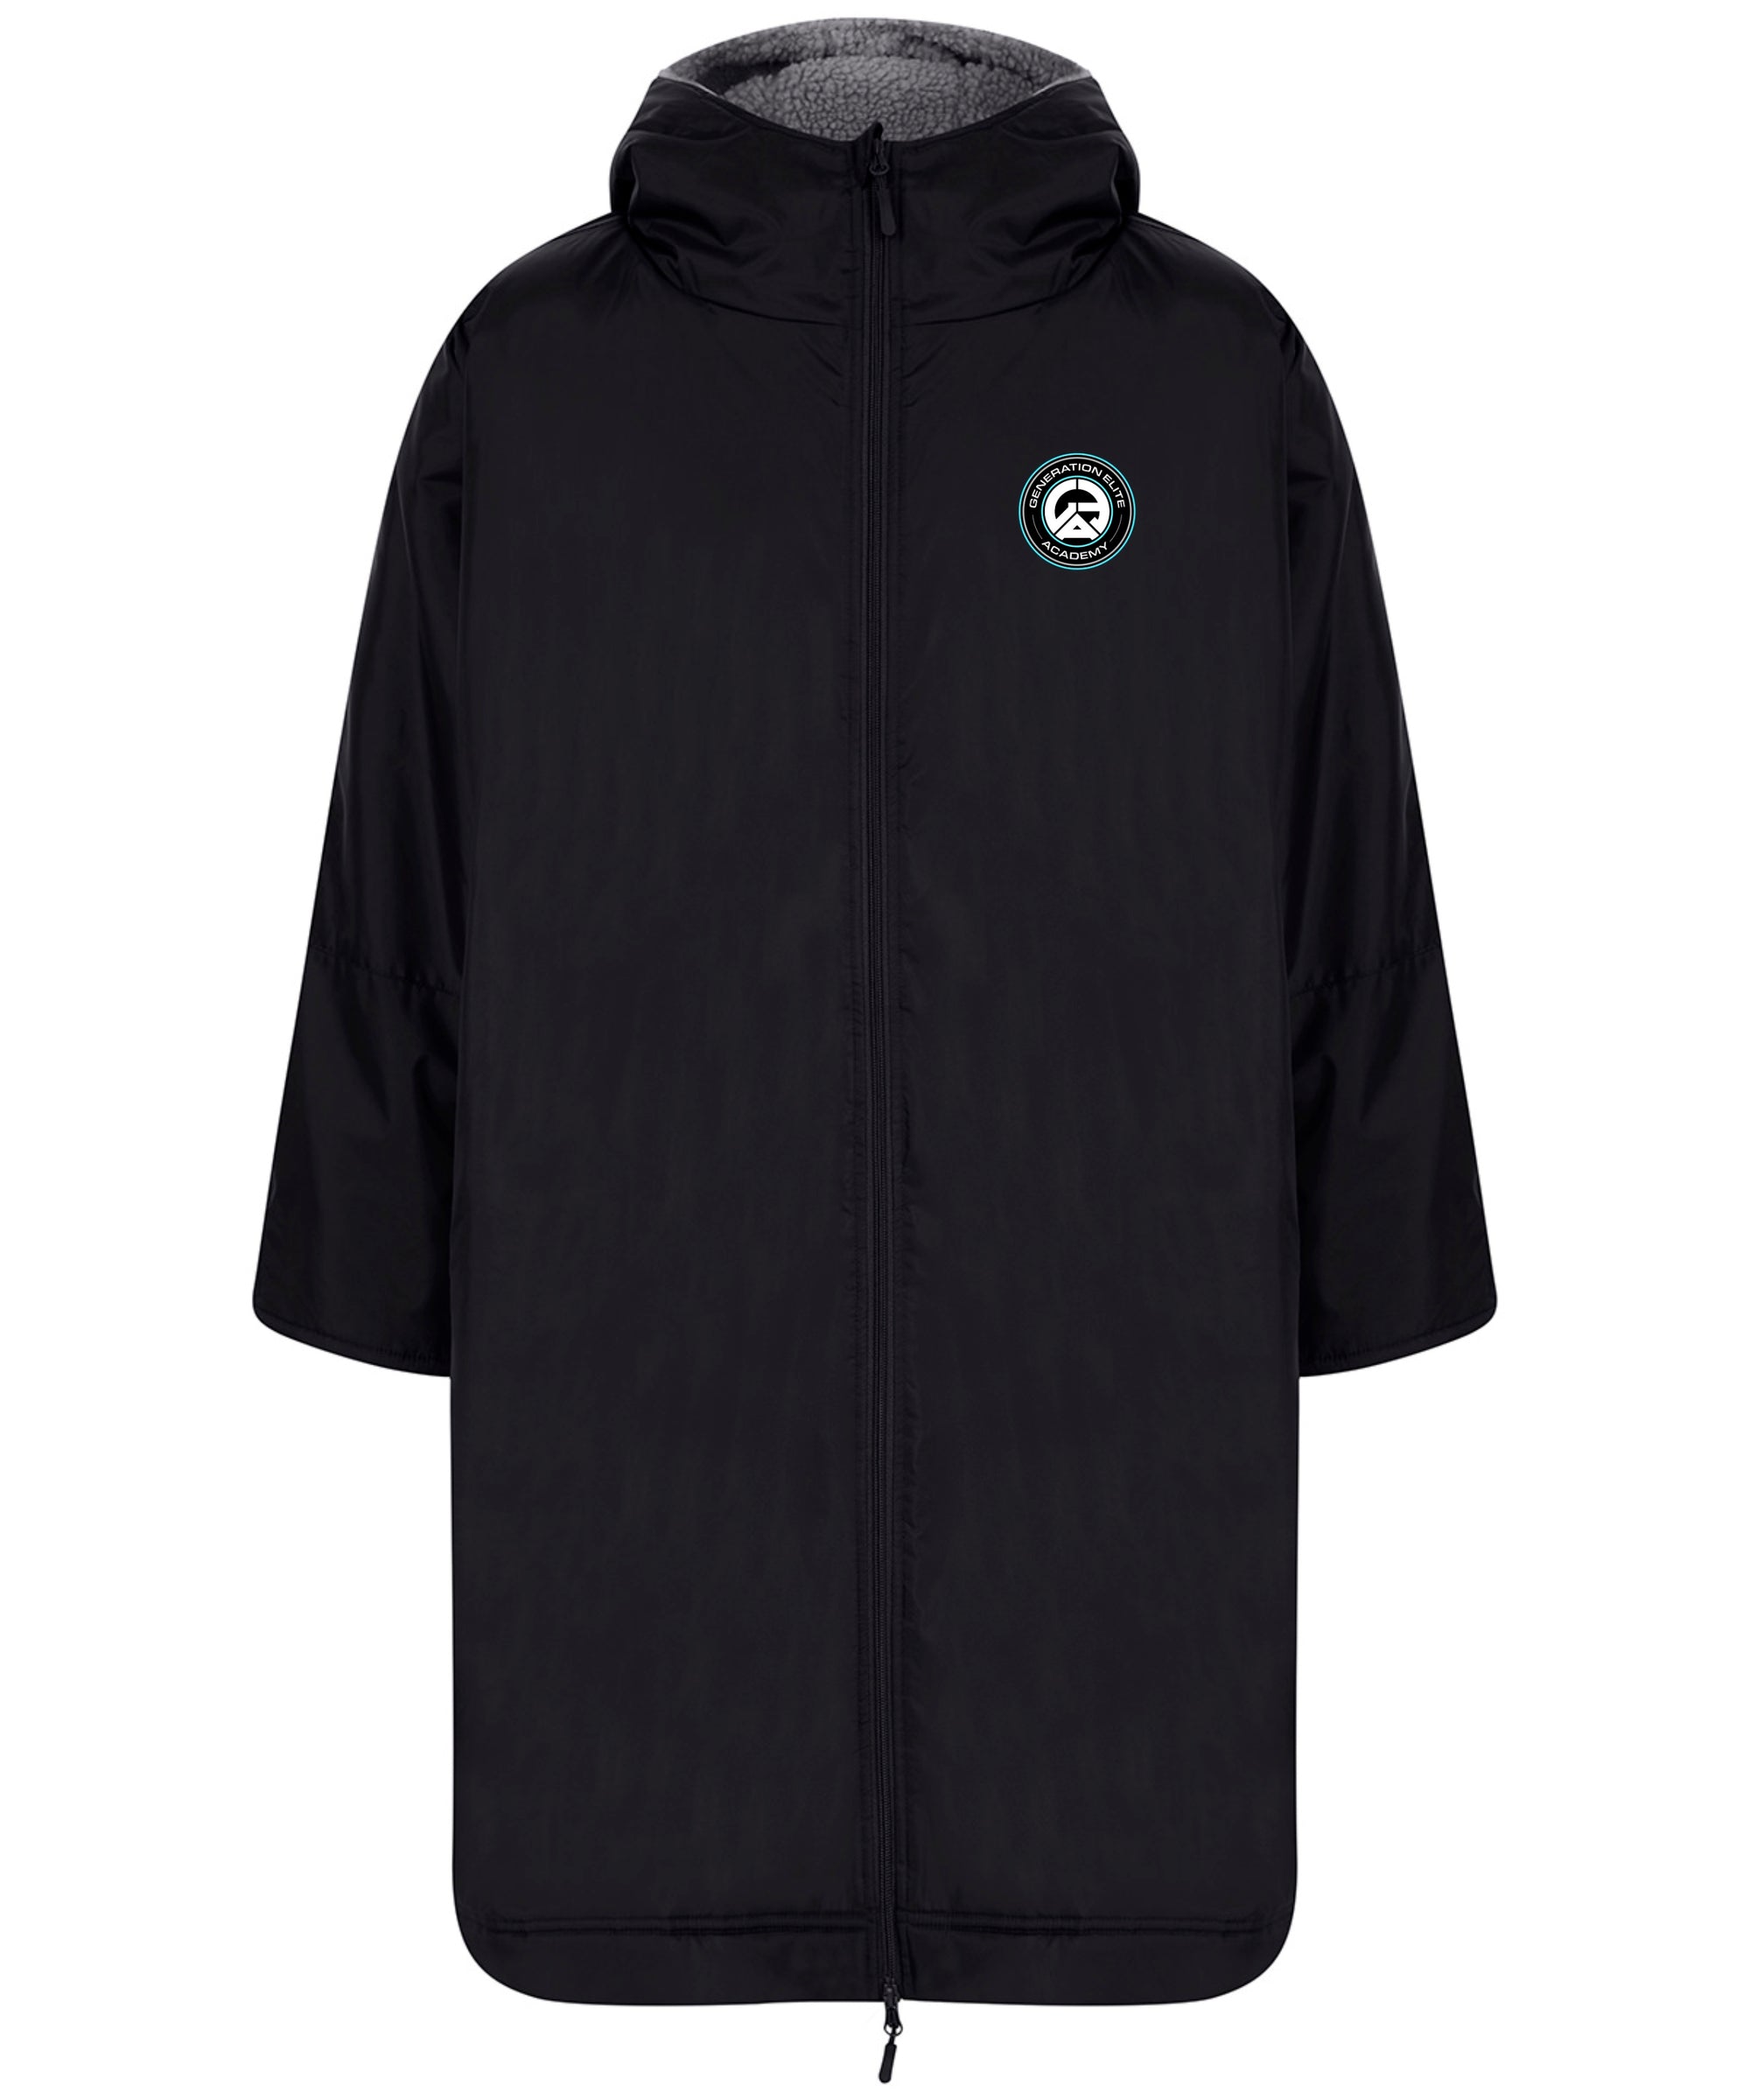 GEA Supporters - All Weather Dry Robe